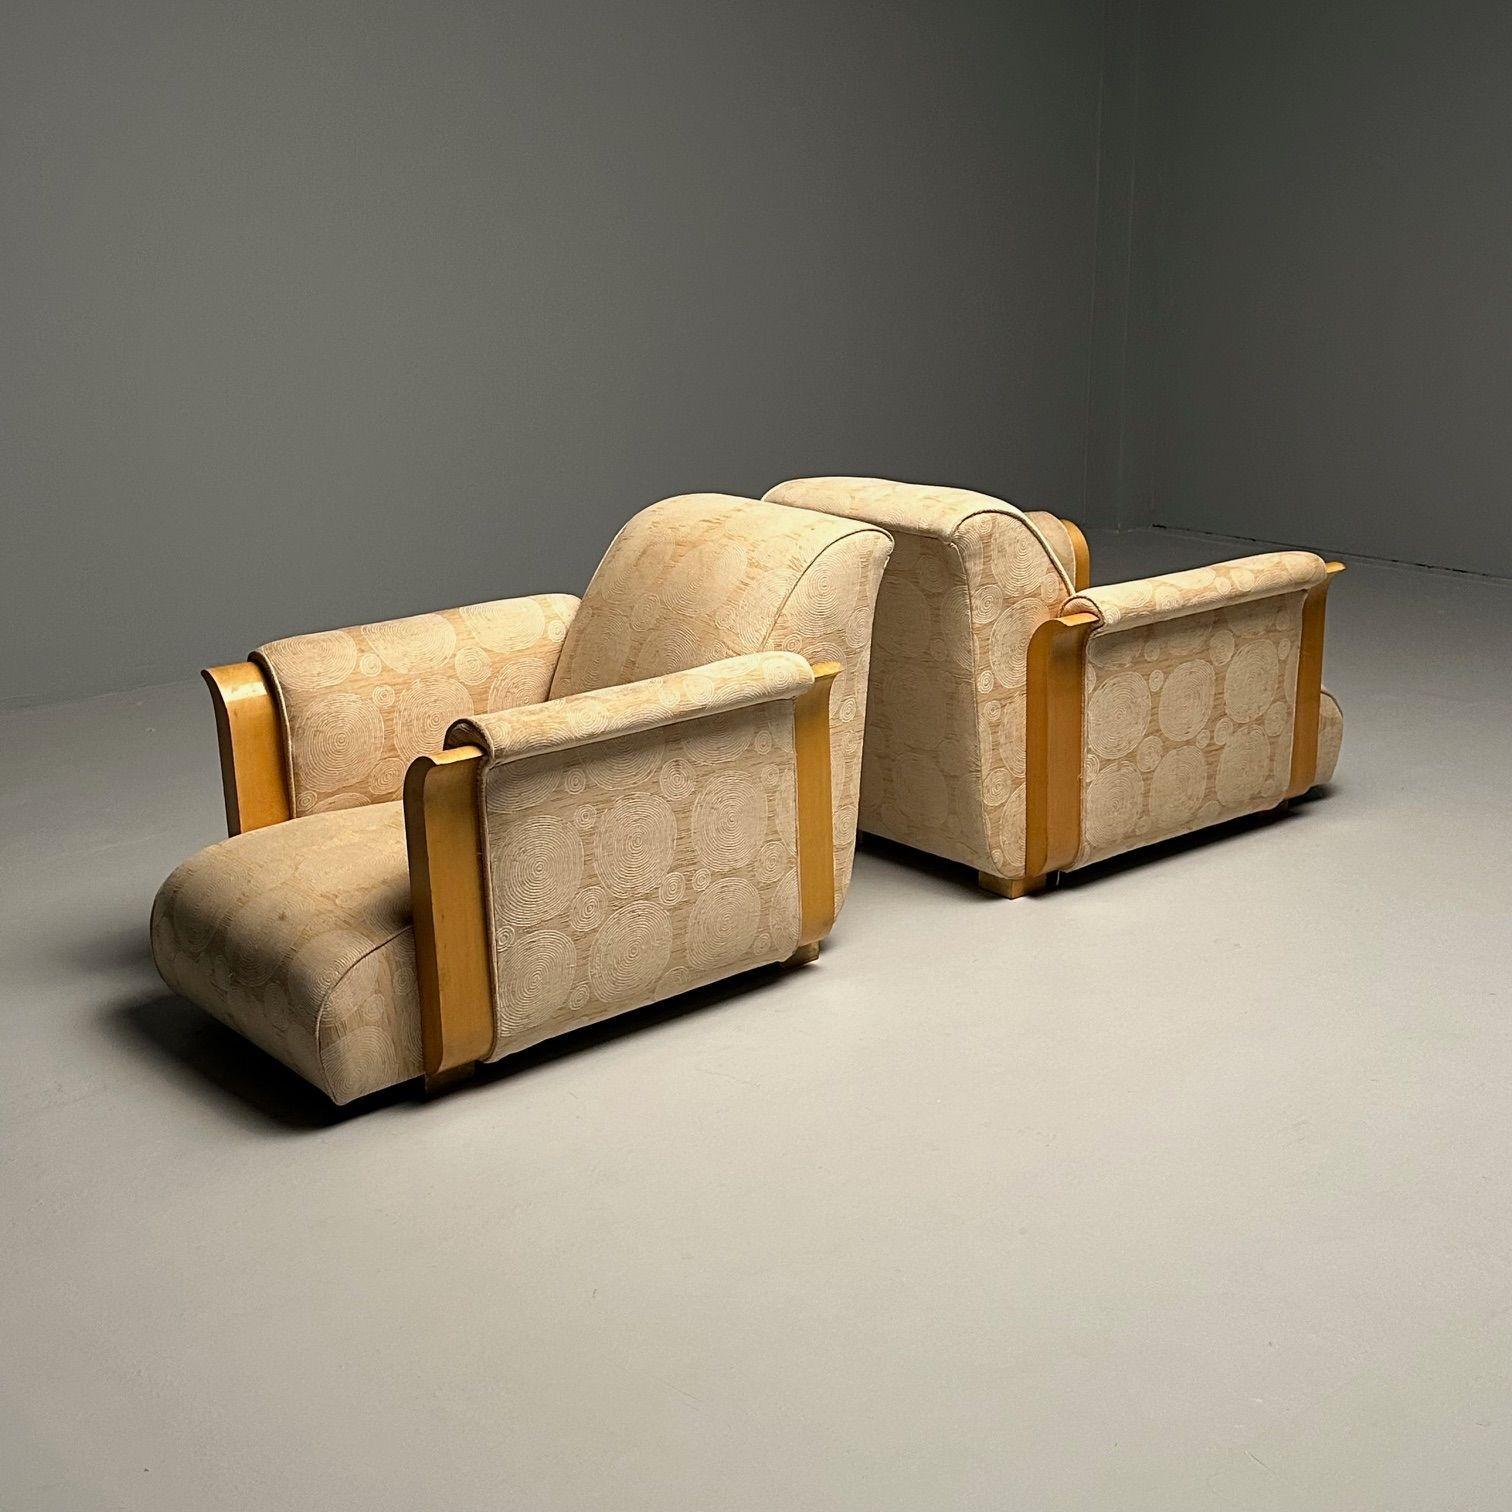 Rare Pair of French Art Deco Lounge Chairs by Michel Dufet, France, 1930s For Sale 3